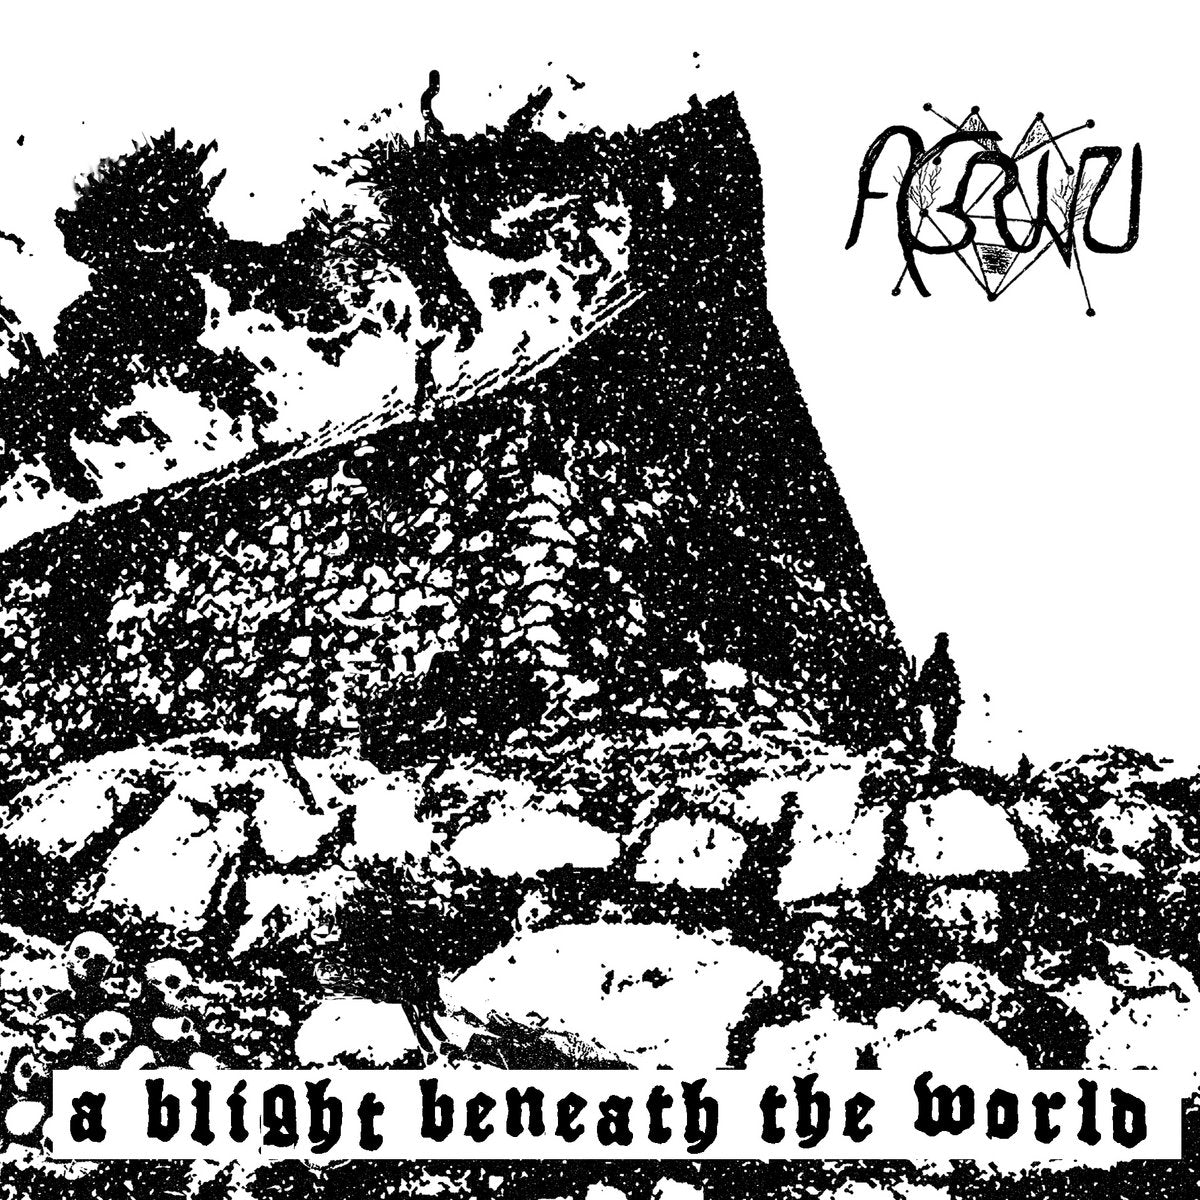 [SOLD OUT] AGRUVZI "A Blight Beneath the World" Cassette Tape (lim. 30)